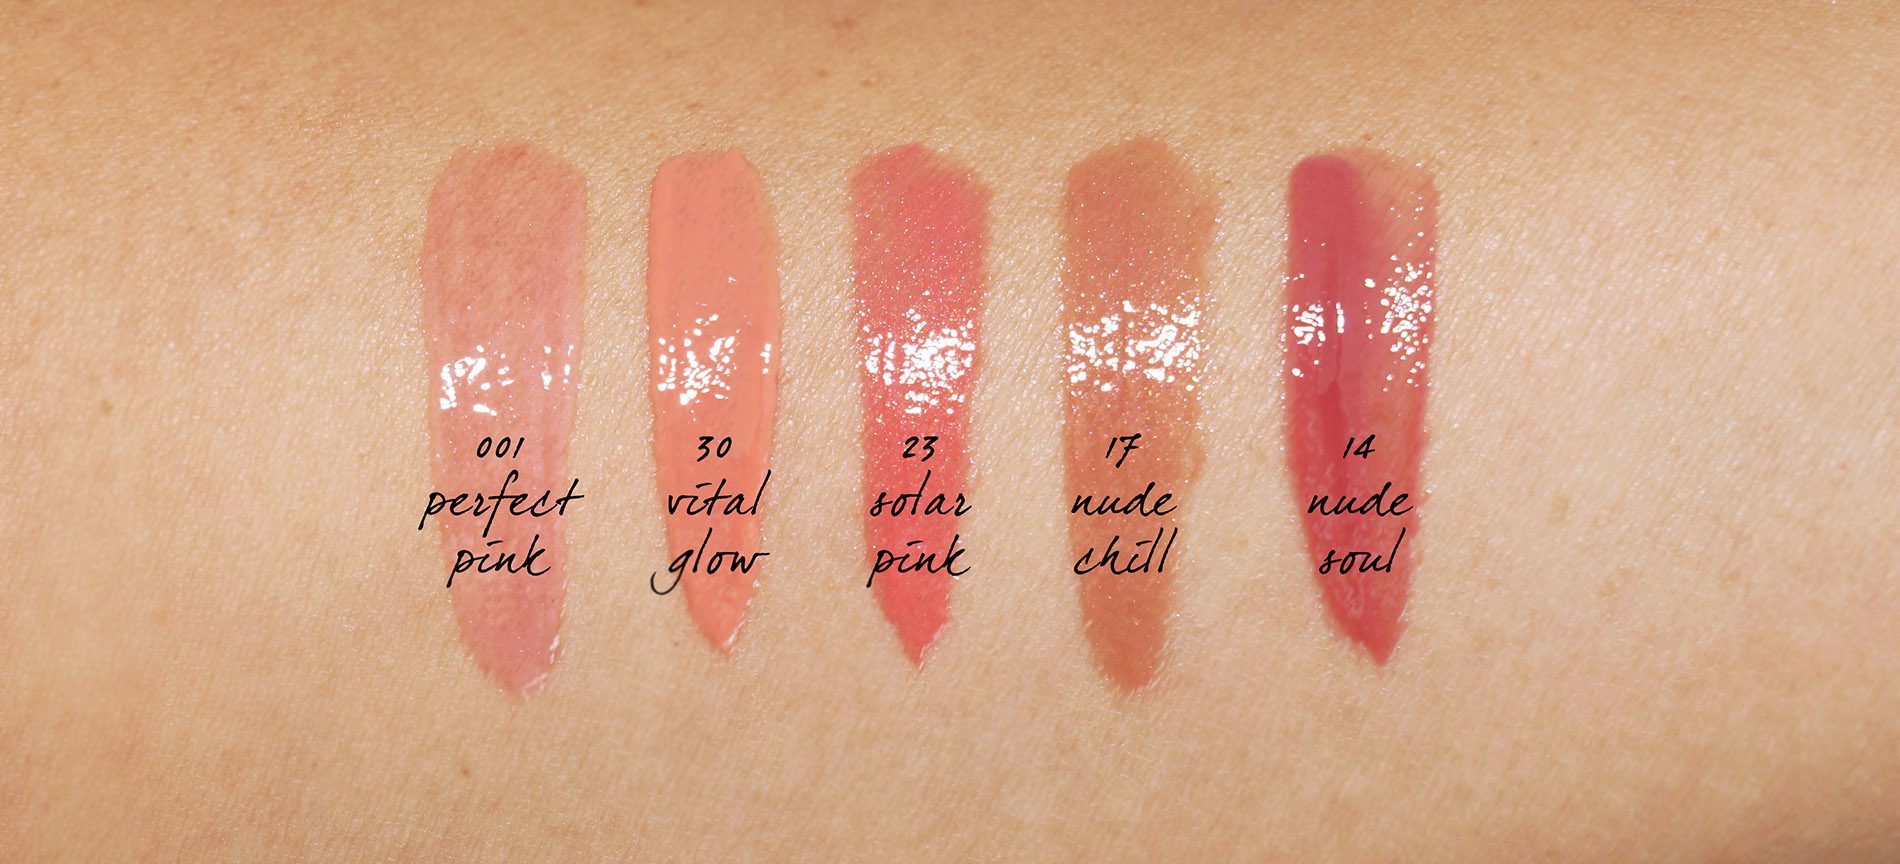 givenchy le rouge perfecto swatch